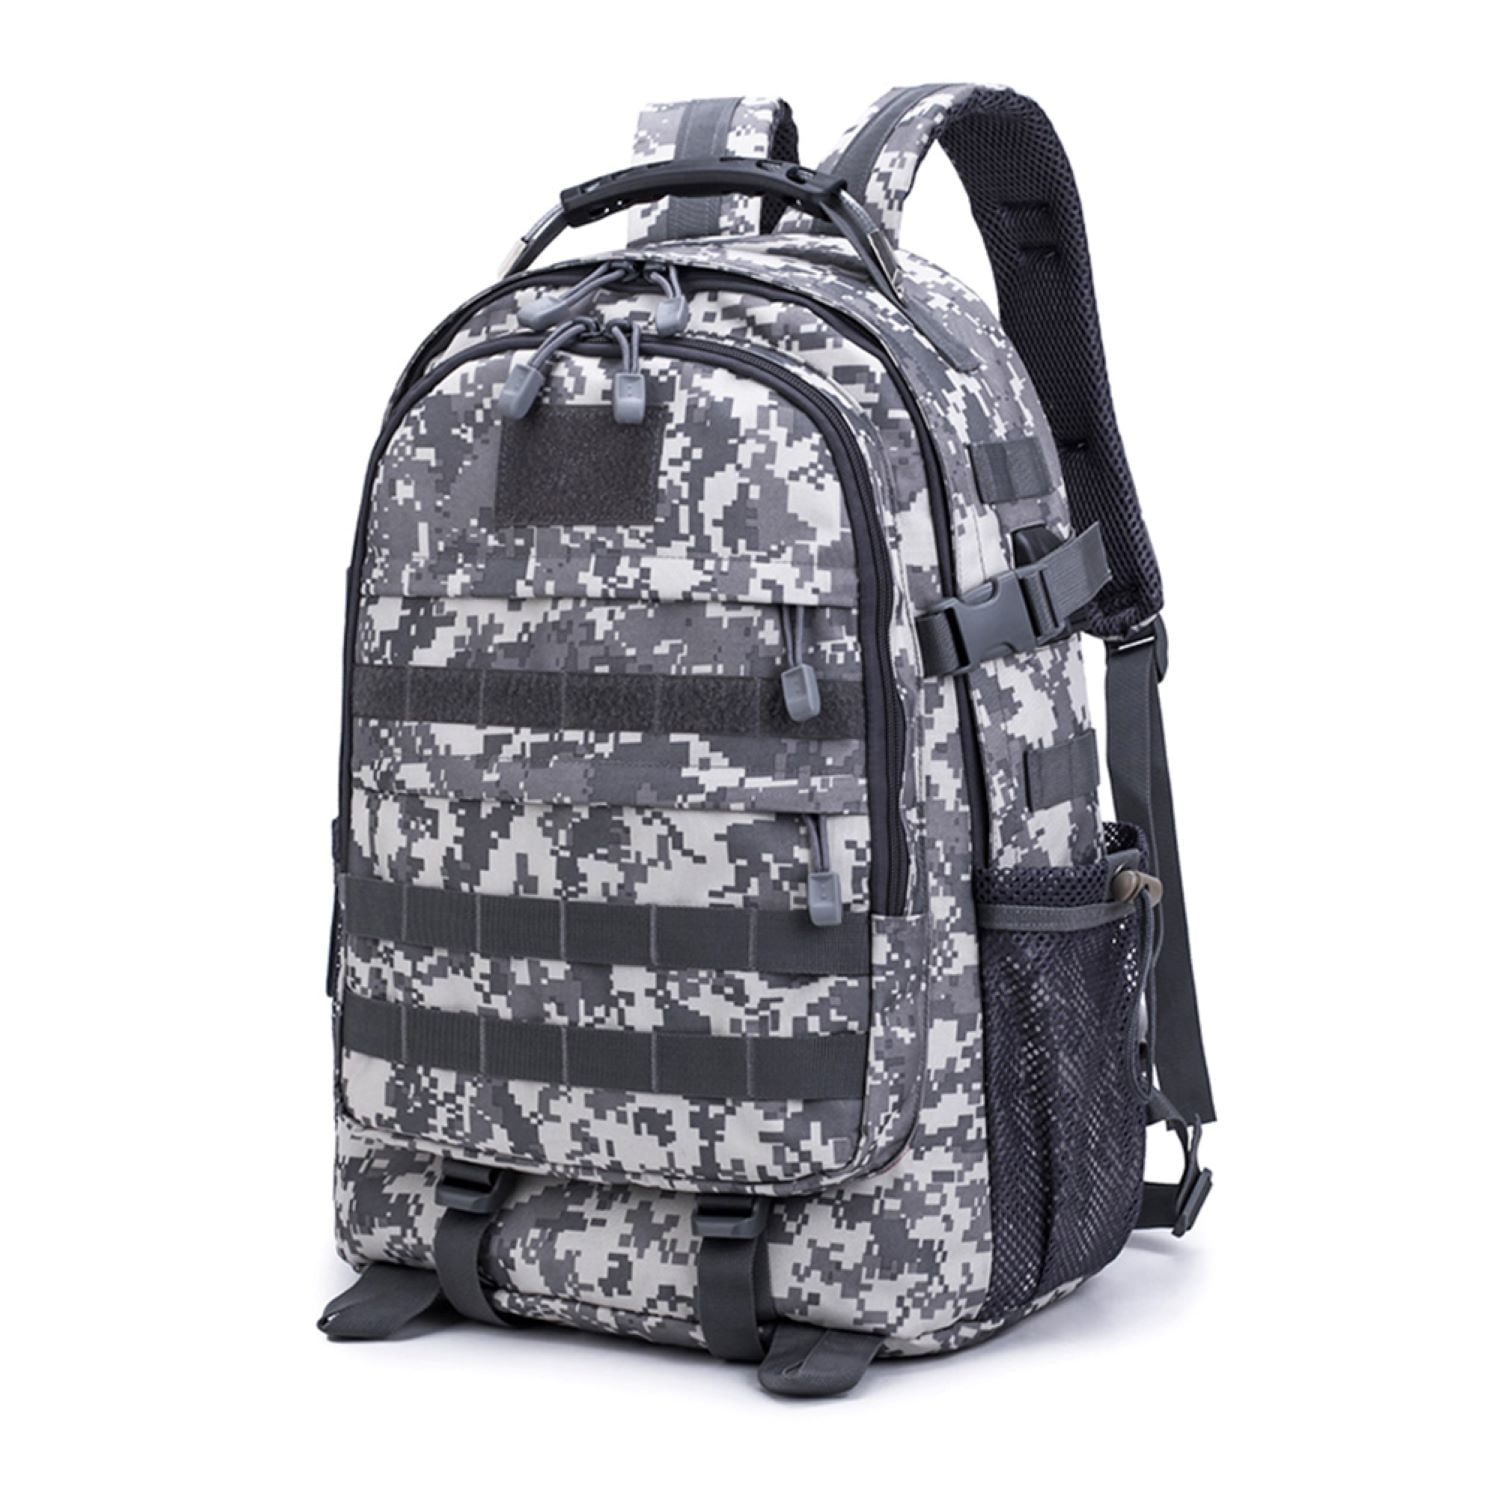 Unisex PU Leather Backpack Camo Green and Grey Print Womens Casual Daypack Mens Travel Sports Bag Boys College Bookbag